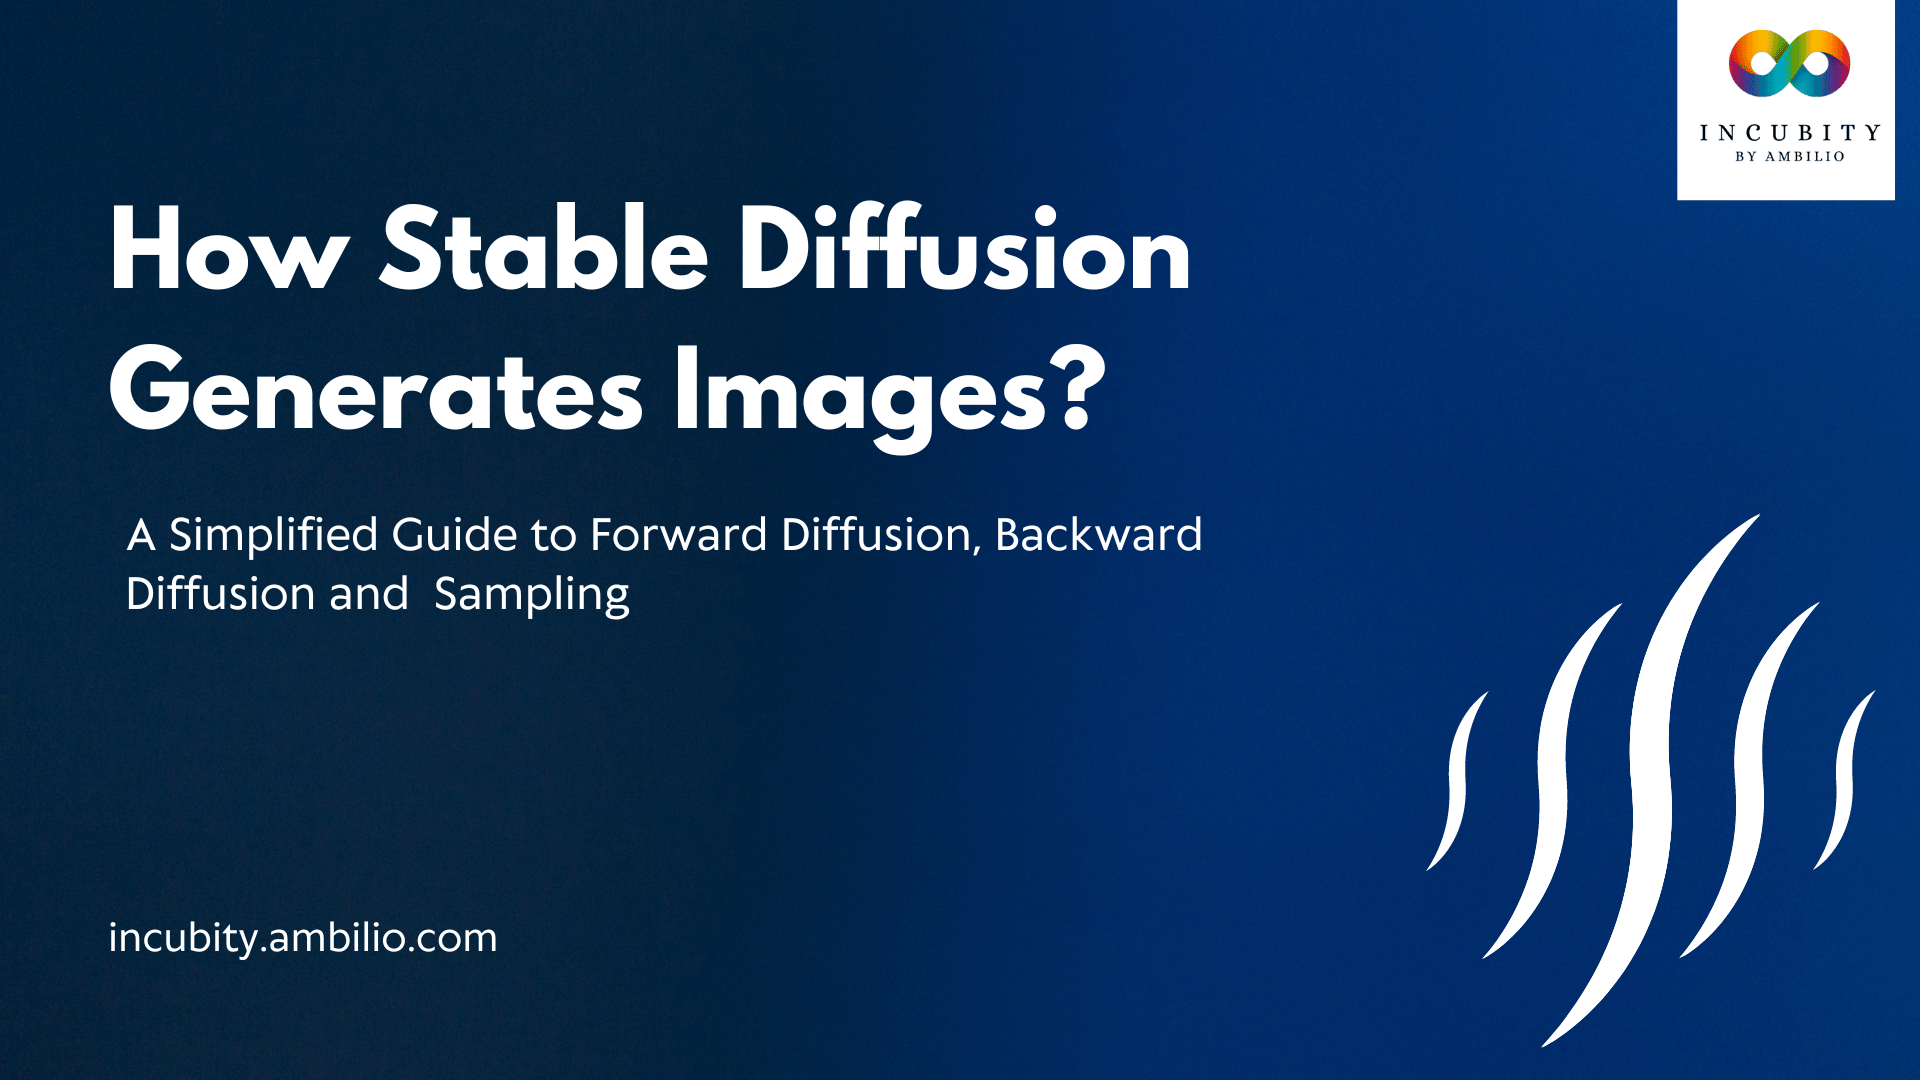 A Simplified Guide on How Stable Diffusion Generates Images